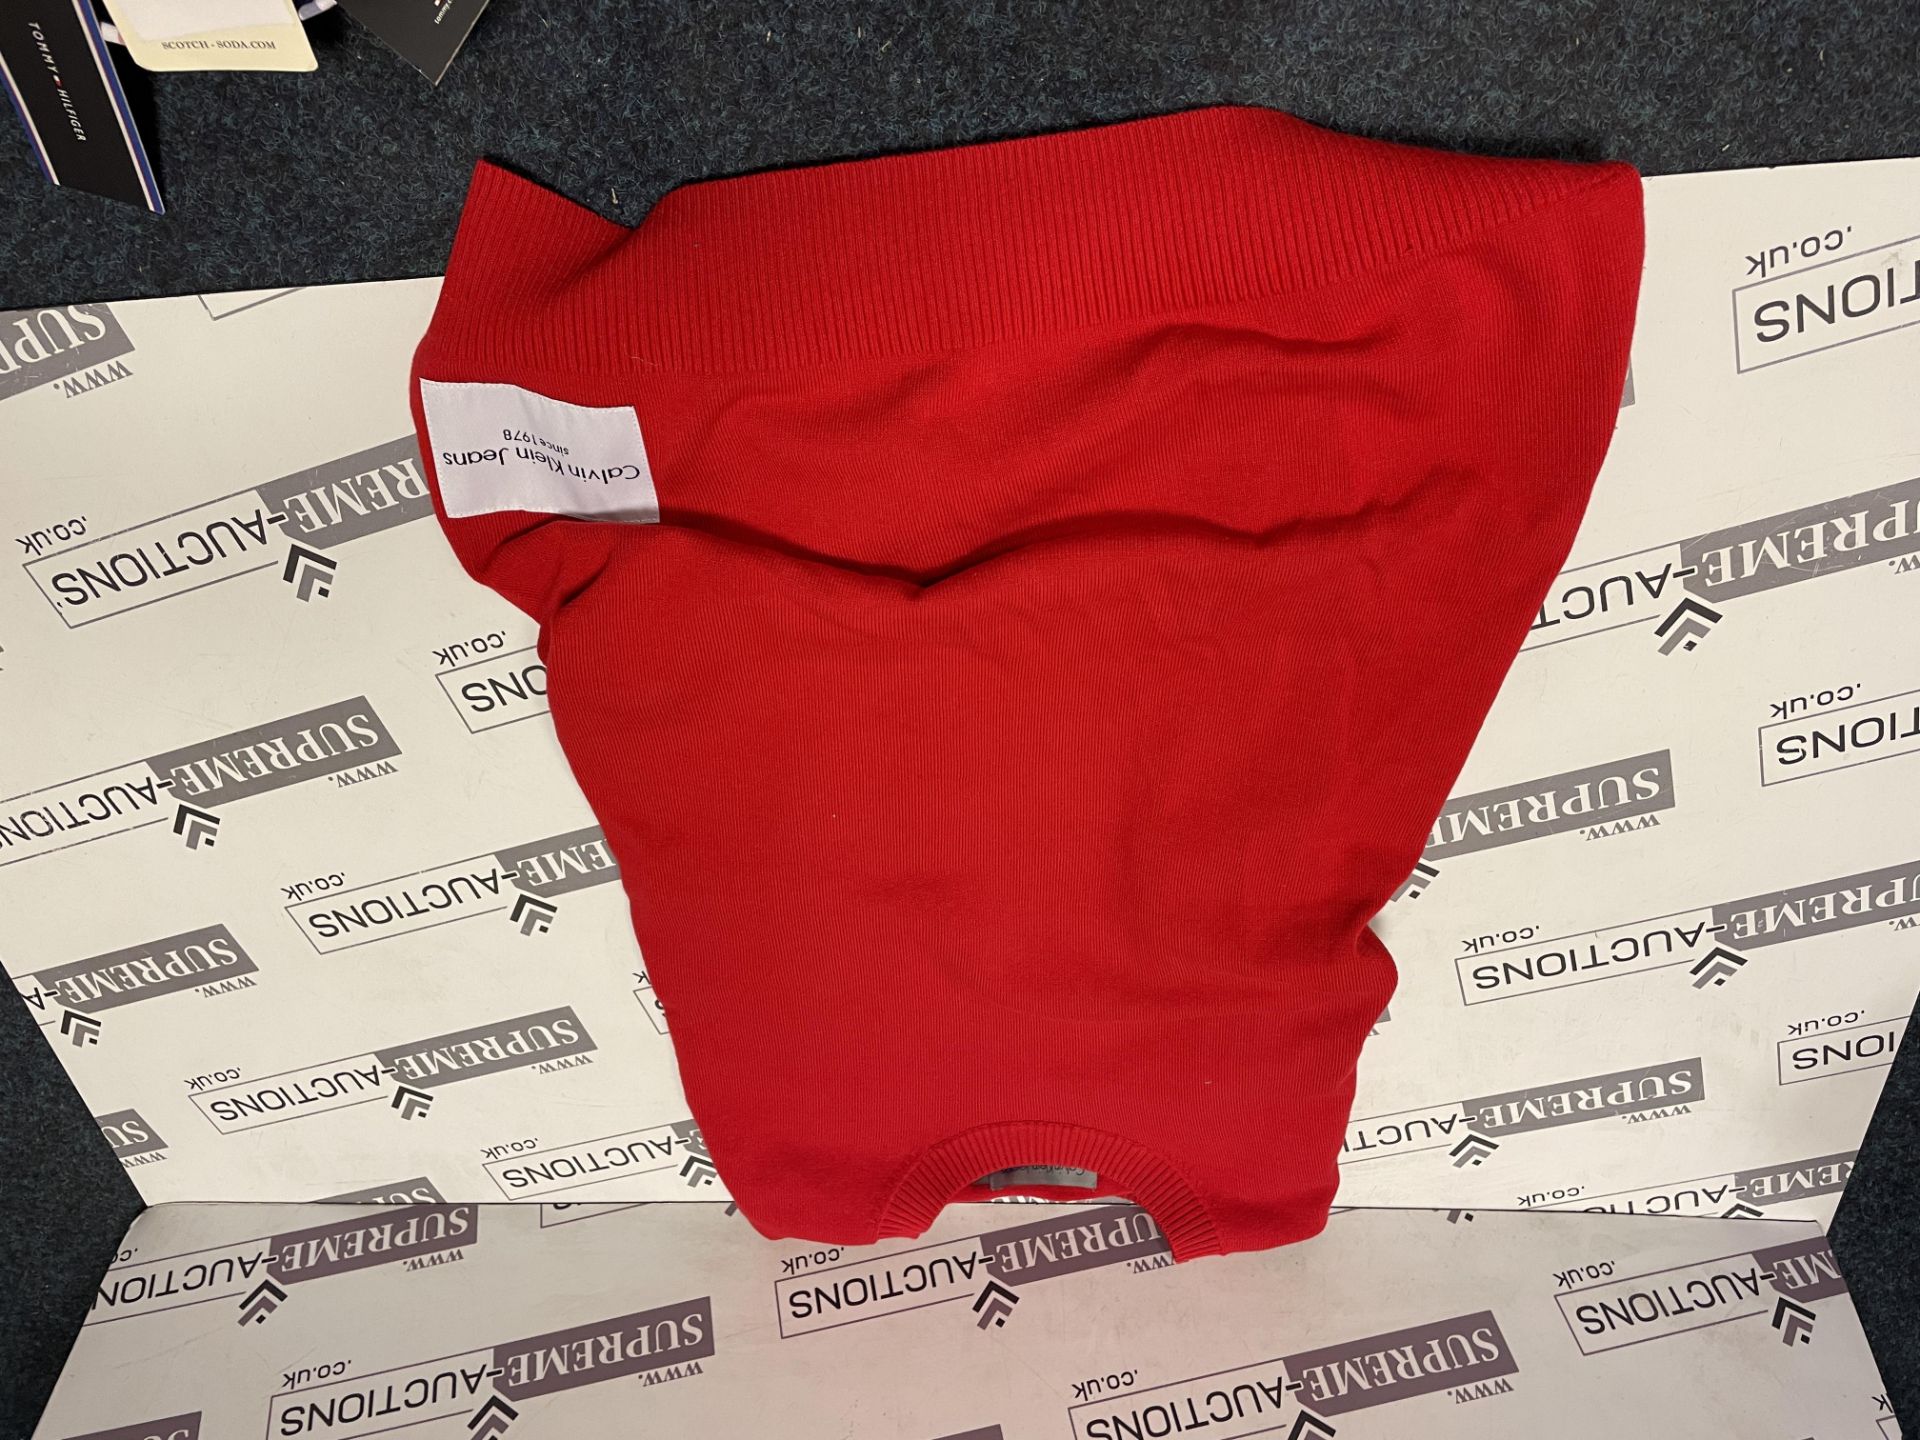 BRAND NEW WITH TAGS CALVIN KLEIN Mens Long Sleeve Crew Neck Sweater RED SIZE (M). RRP £149.99. (